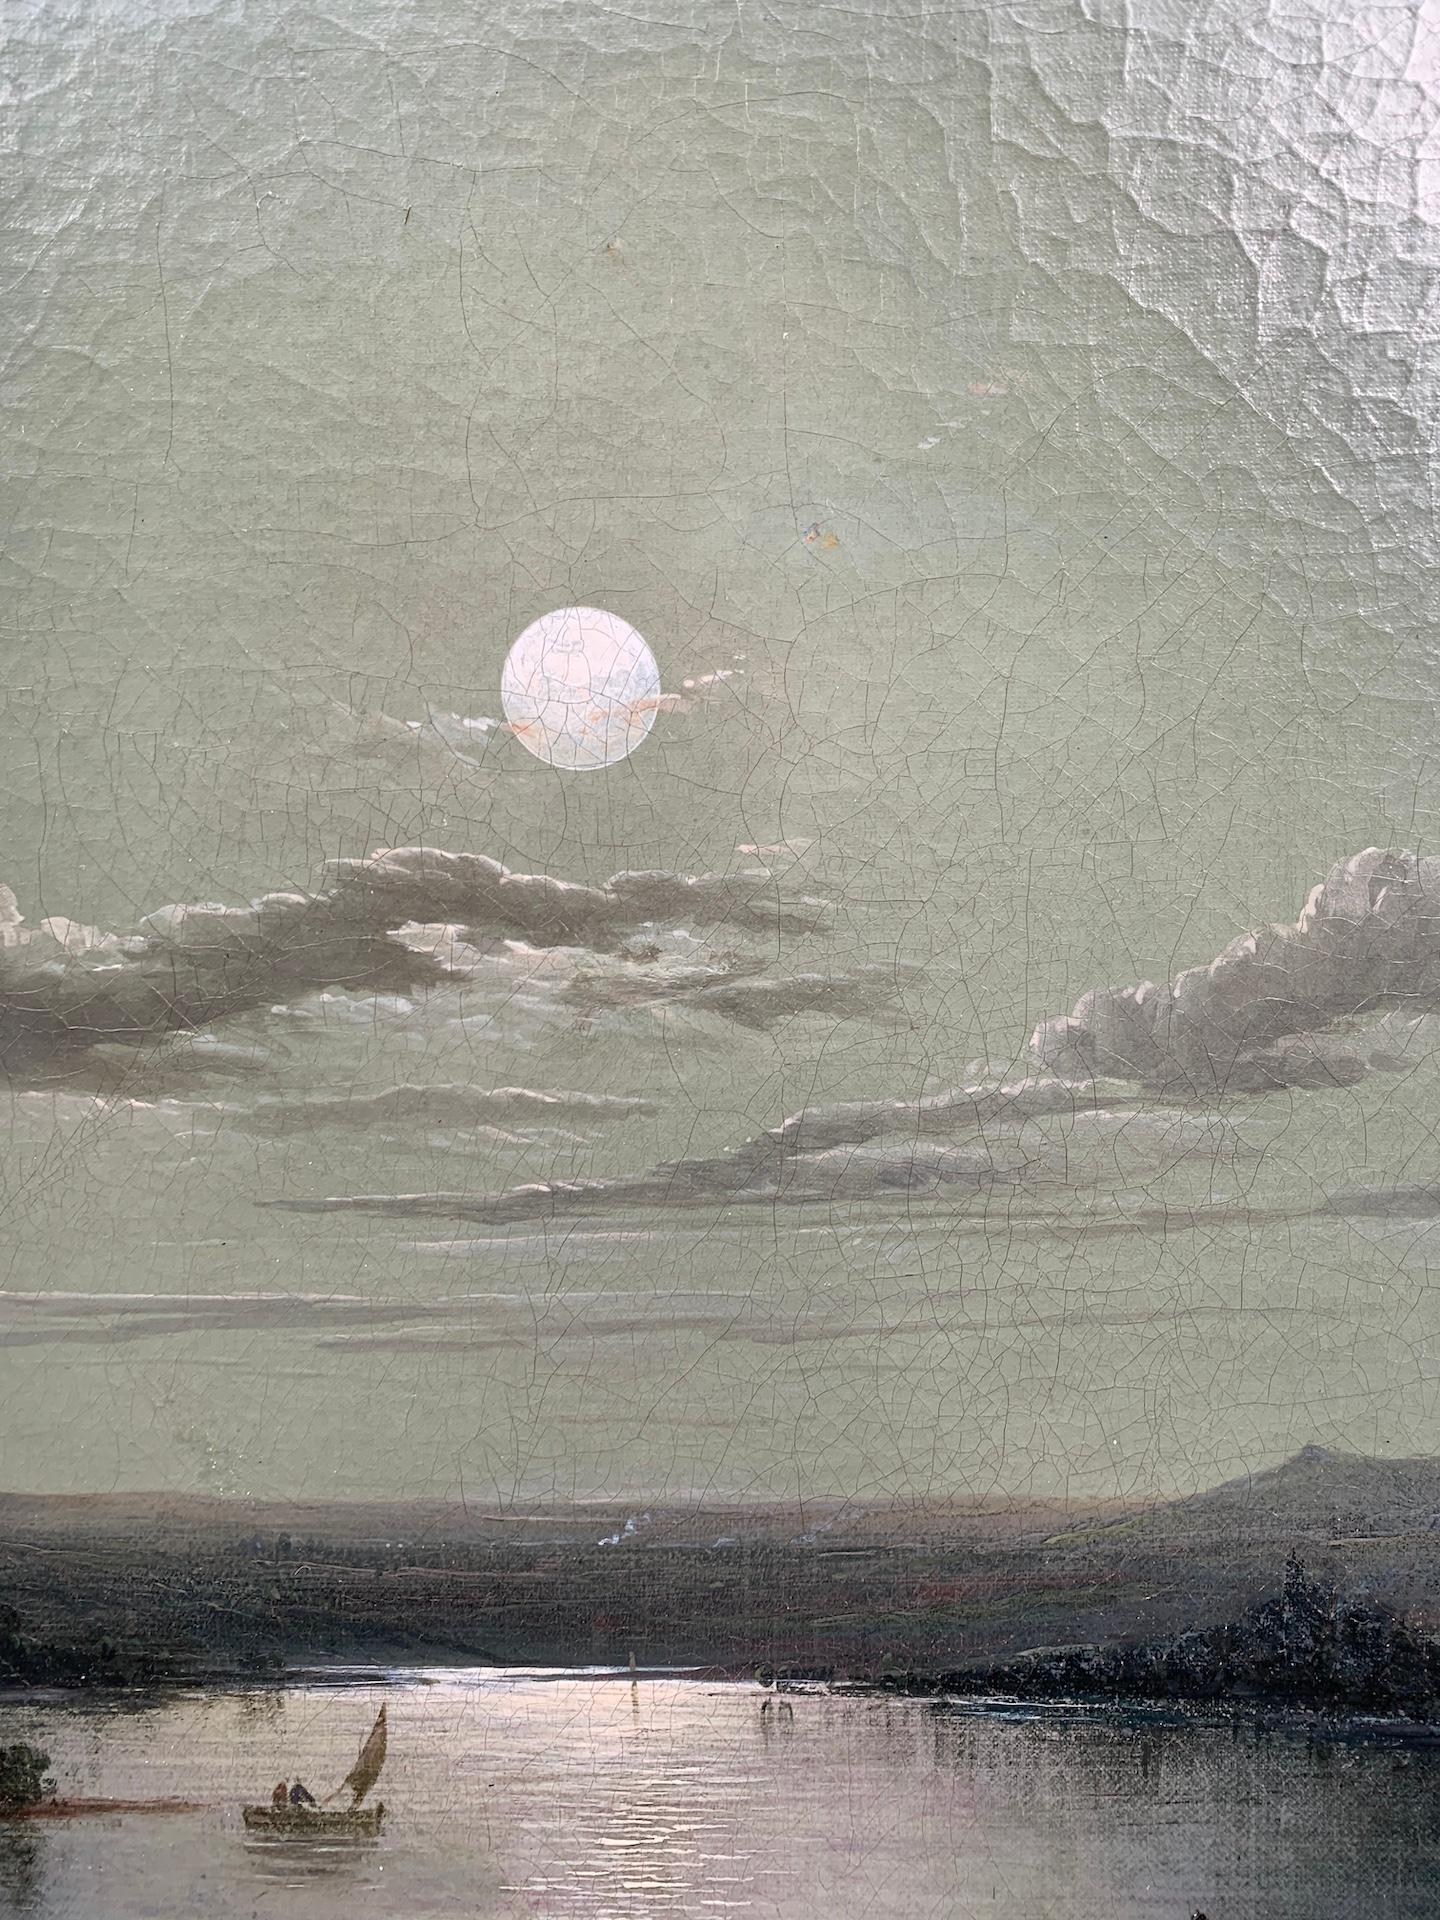 Henry Pether, late 18th-century Moonlight lake Landscape.

Born into a family of artists, Henry was the son of Abraham Pether (1756-1812), a talented landscape painter originally from Chichester, recognized for his skill in depicting moonlit scenes.